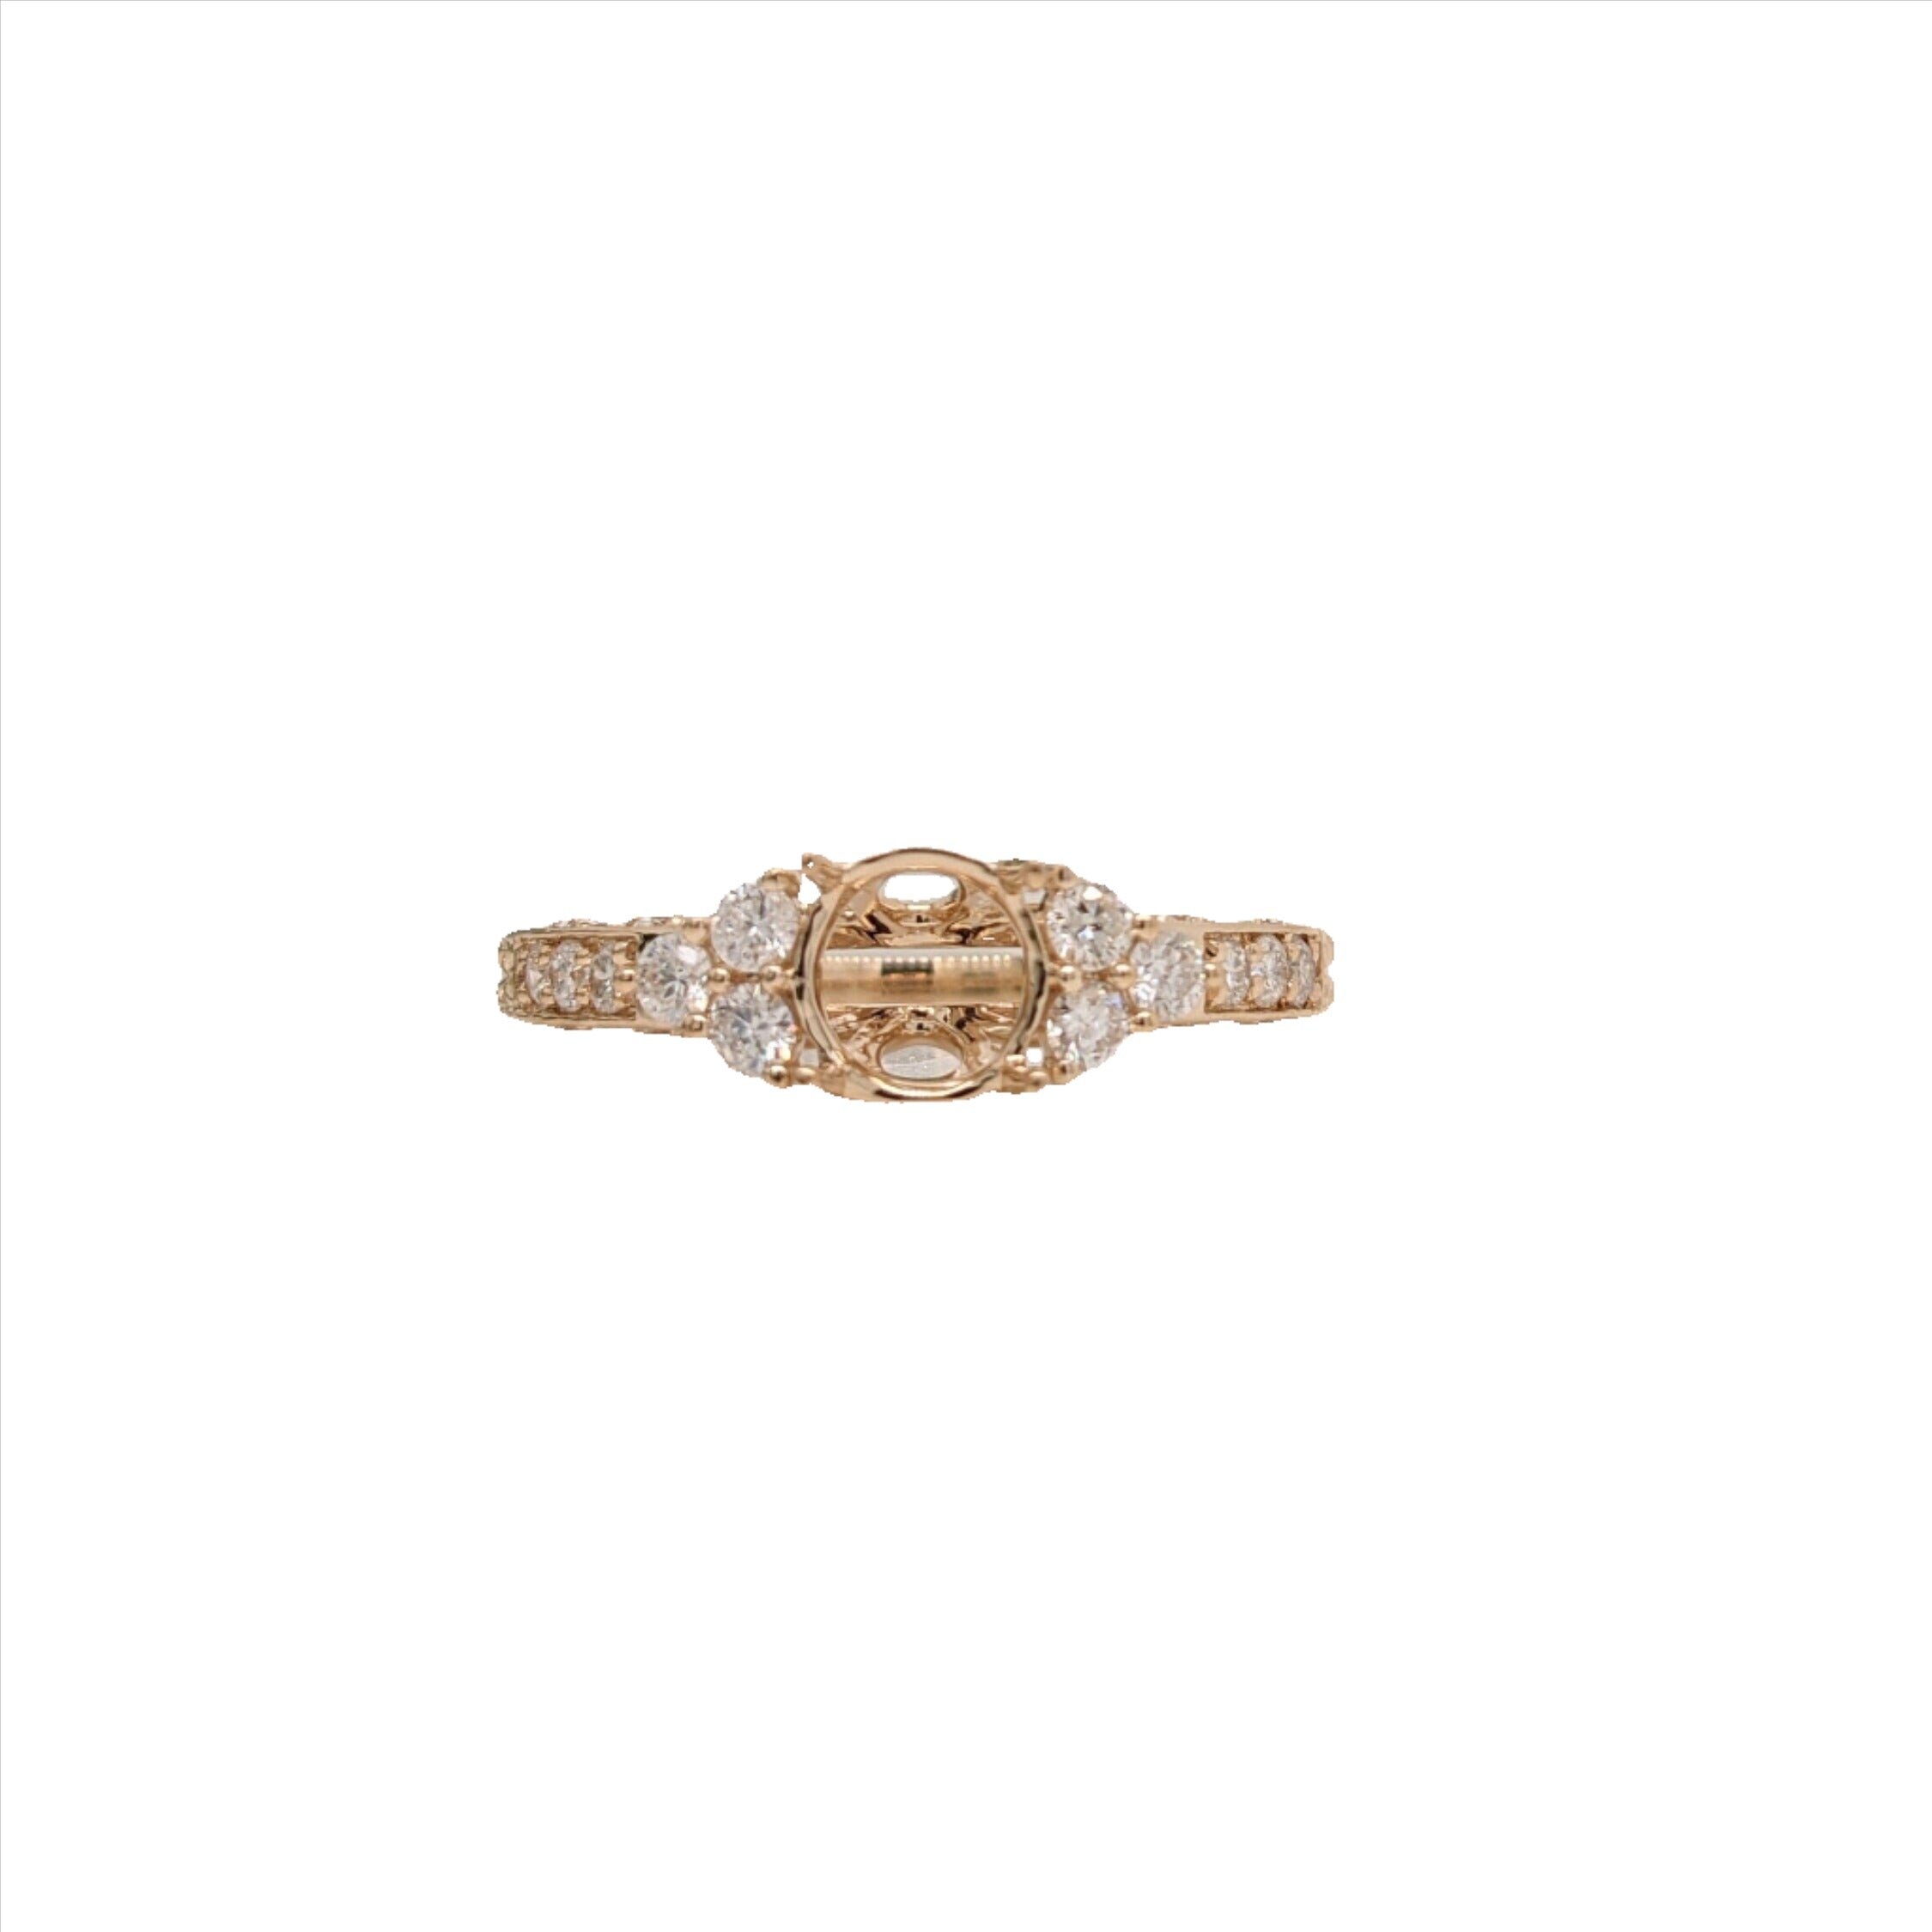 Vintage Inspired Diamond Ring Semi Mount in Solid 14K Gold | Round 6mm + | Textured Shank | Art Deco | Wide Band | Detailed | Customizable